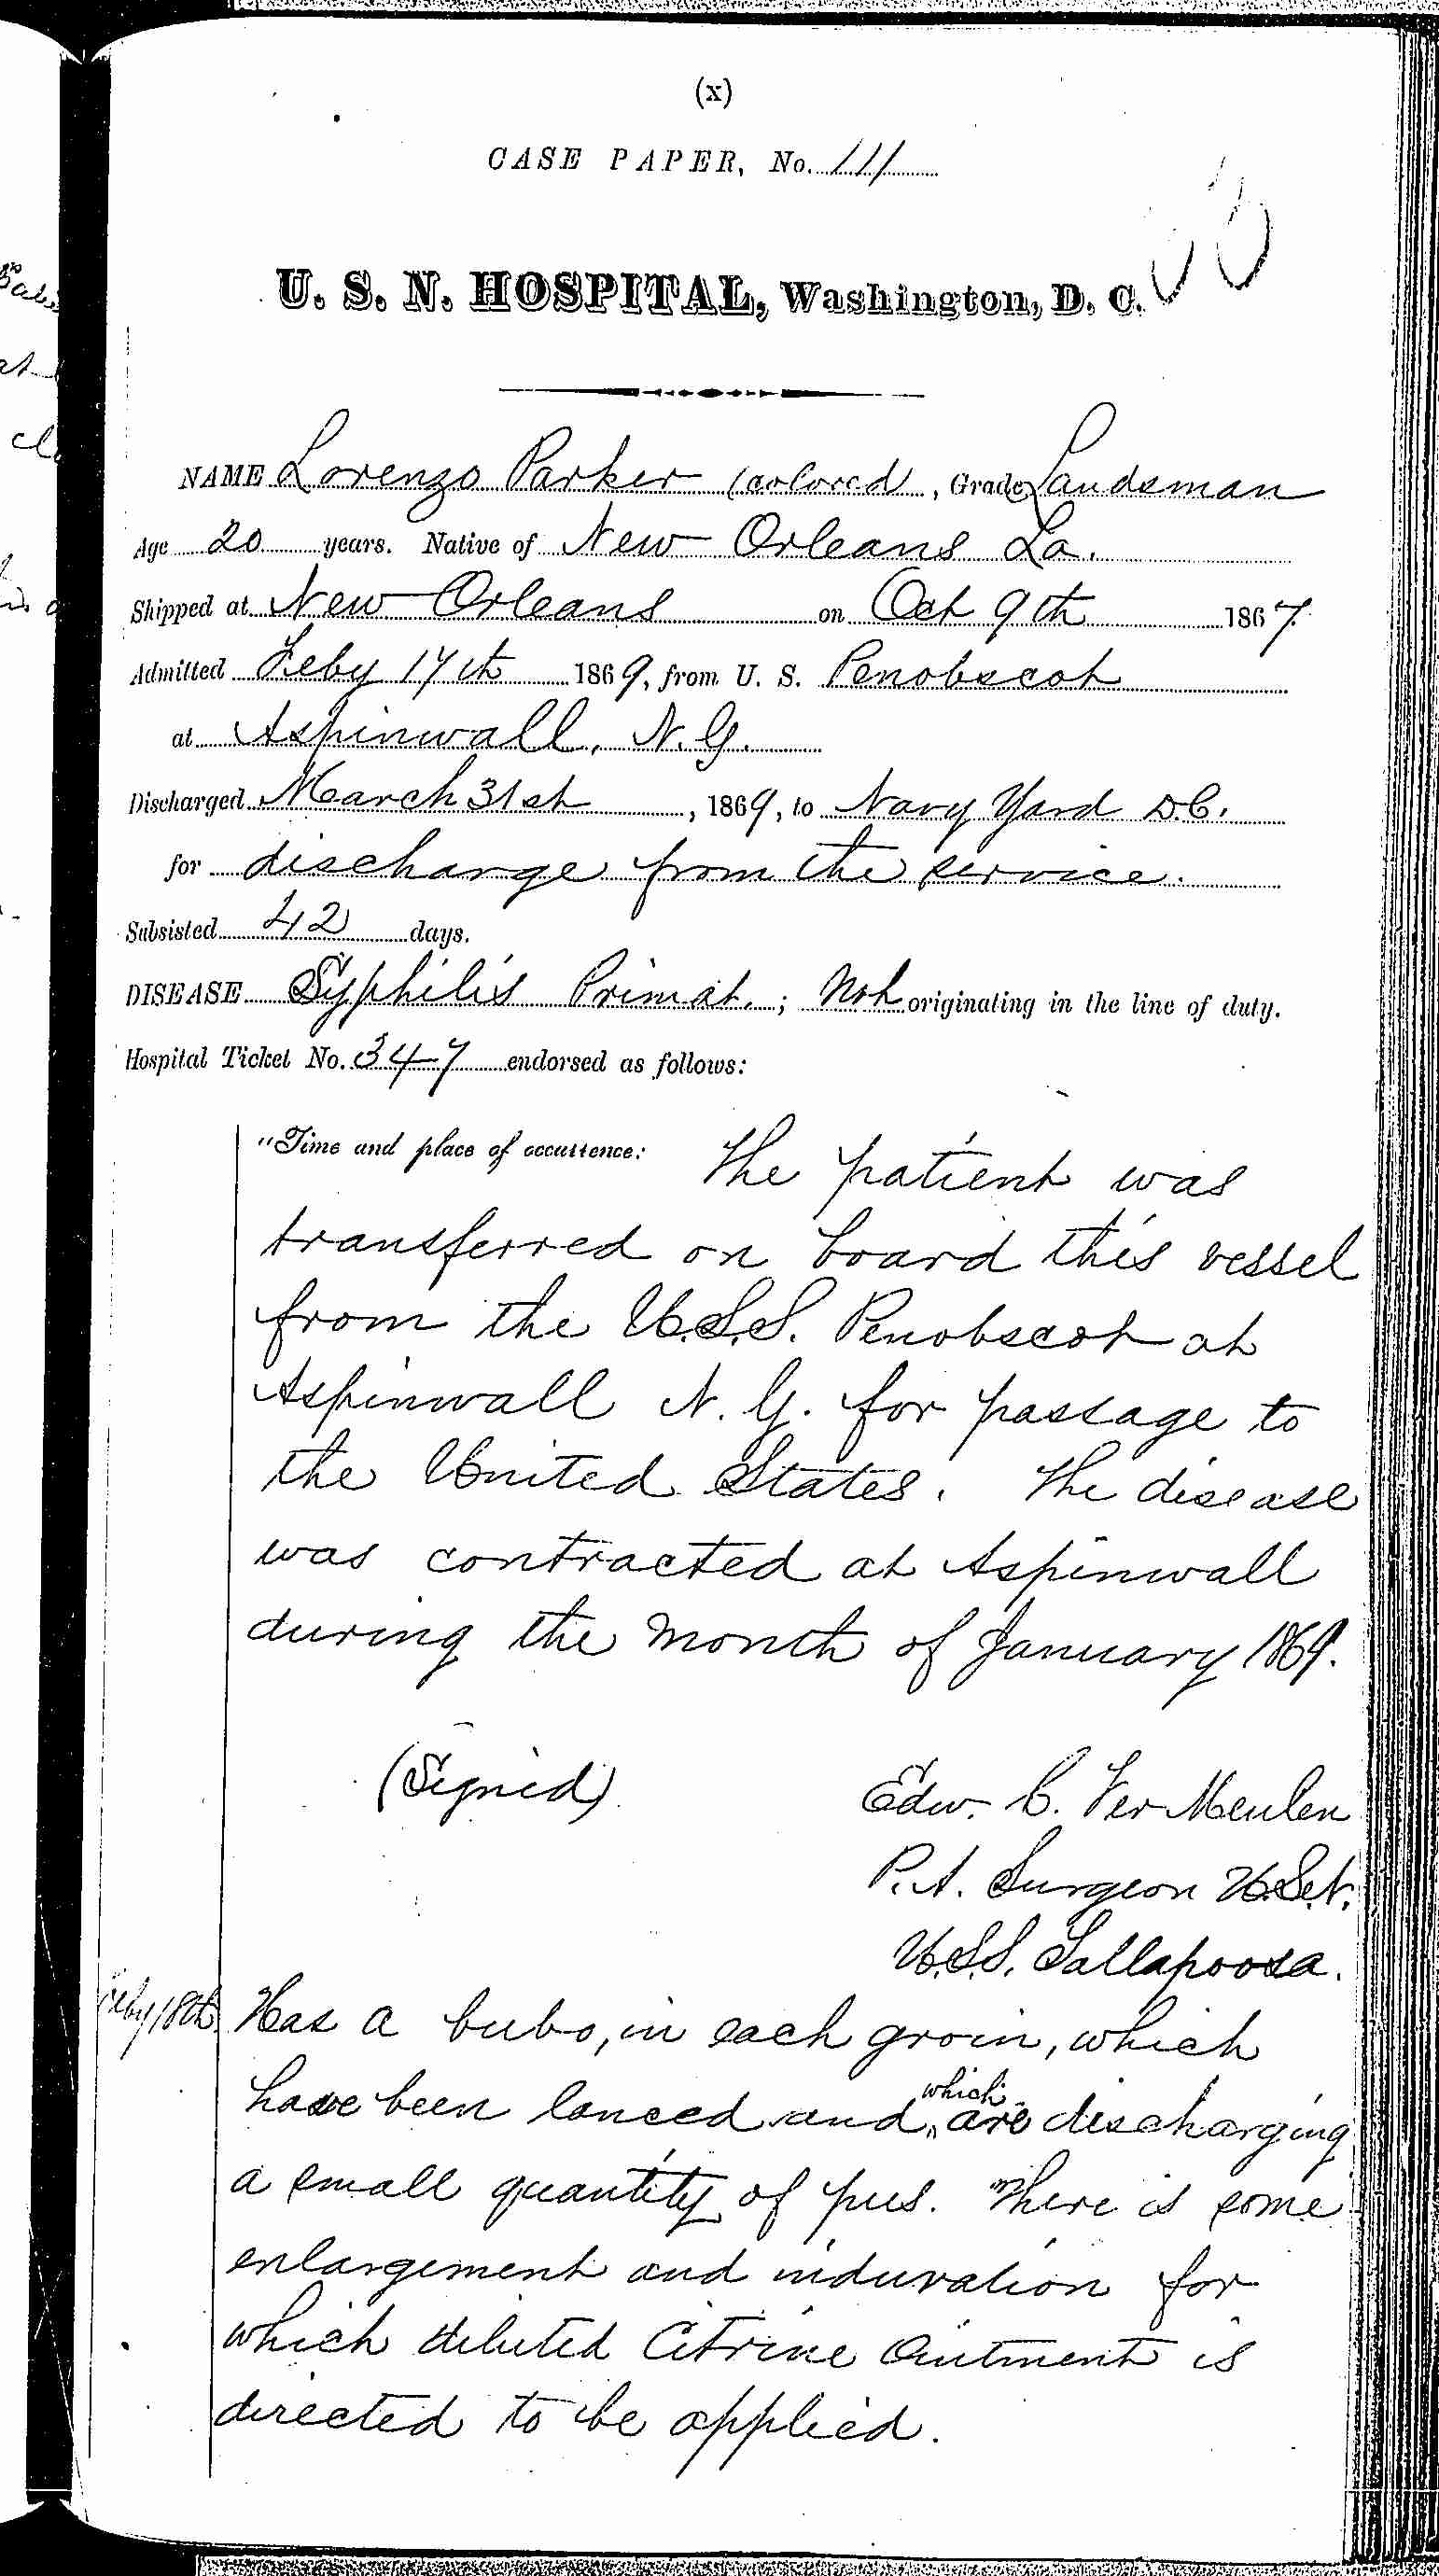 Entry for Lorenzo Parker (page 1 of 3) in the log Hospital Tickets and Case Papers - Naval Hospital - Washington, D.C. - 1868-69